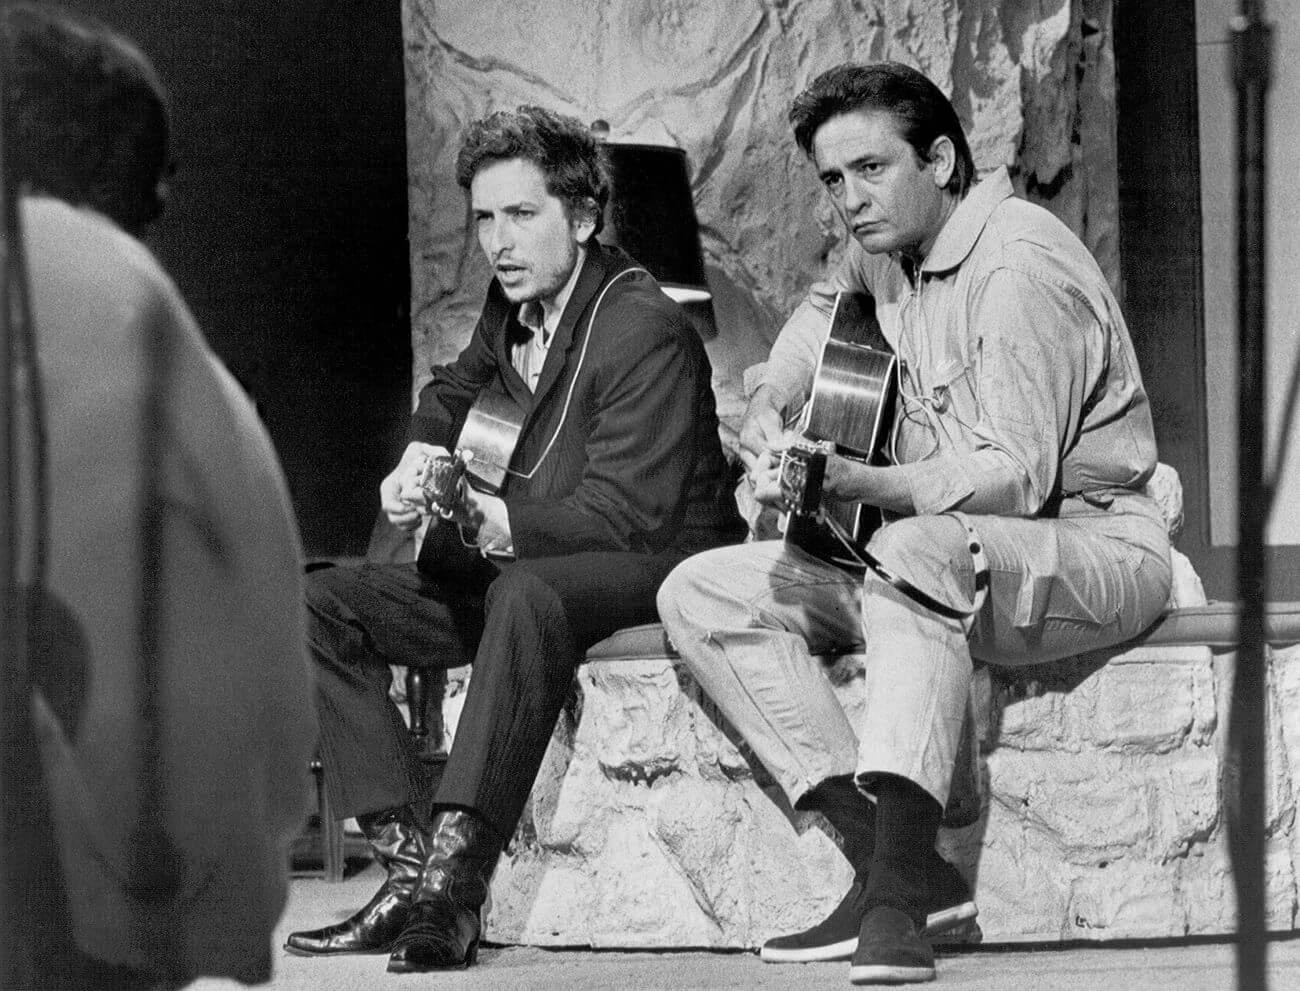 A black and white picture of Bob Dylan and Johnny Cash sitting on a stone ledge together with guitars.